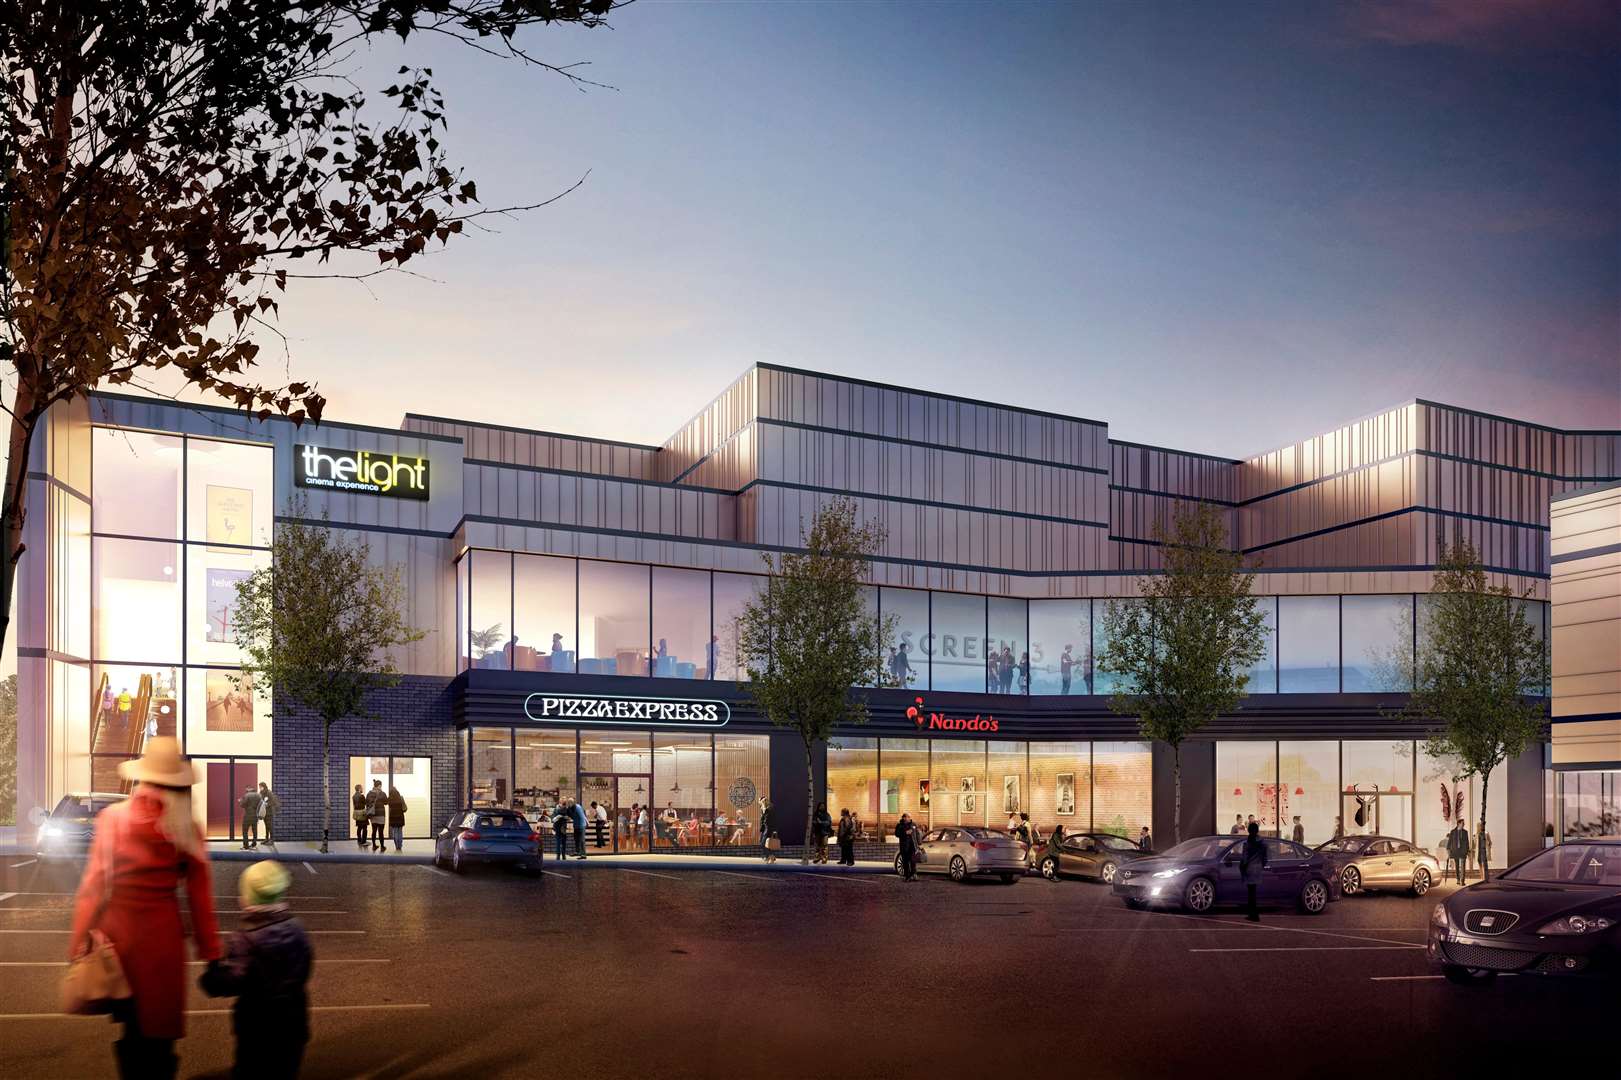 An artist's impression showing Nando's and Pizza Express underneath the new Light cinema in Sittingbourne